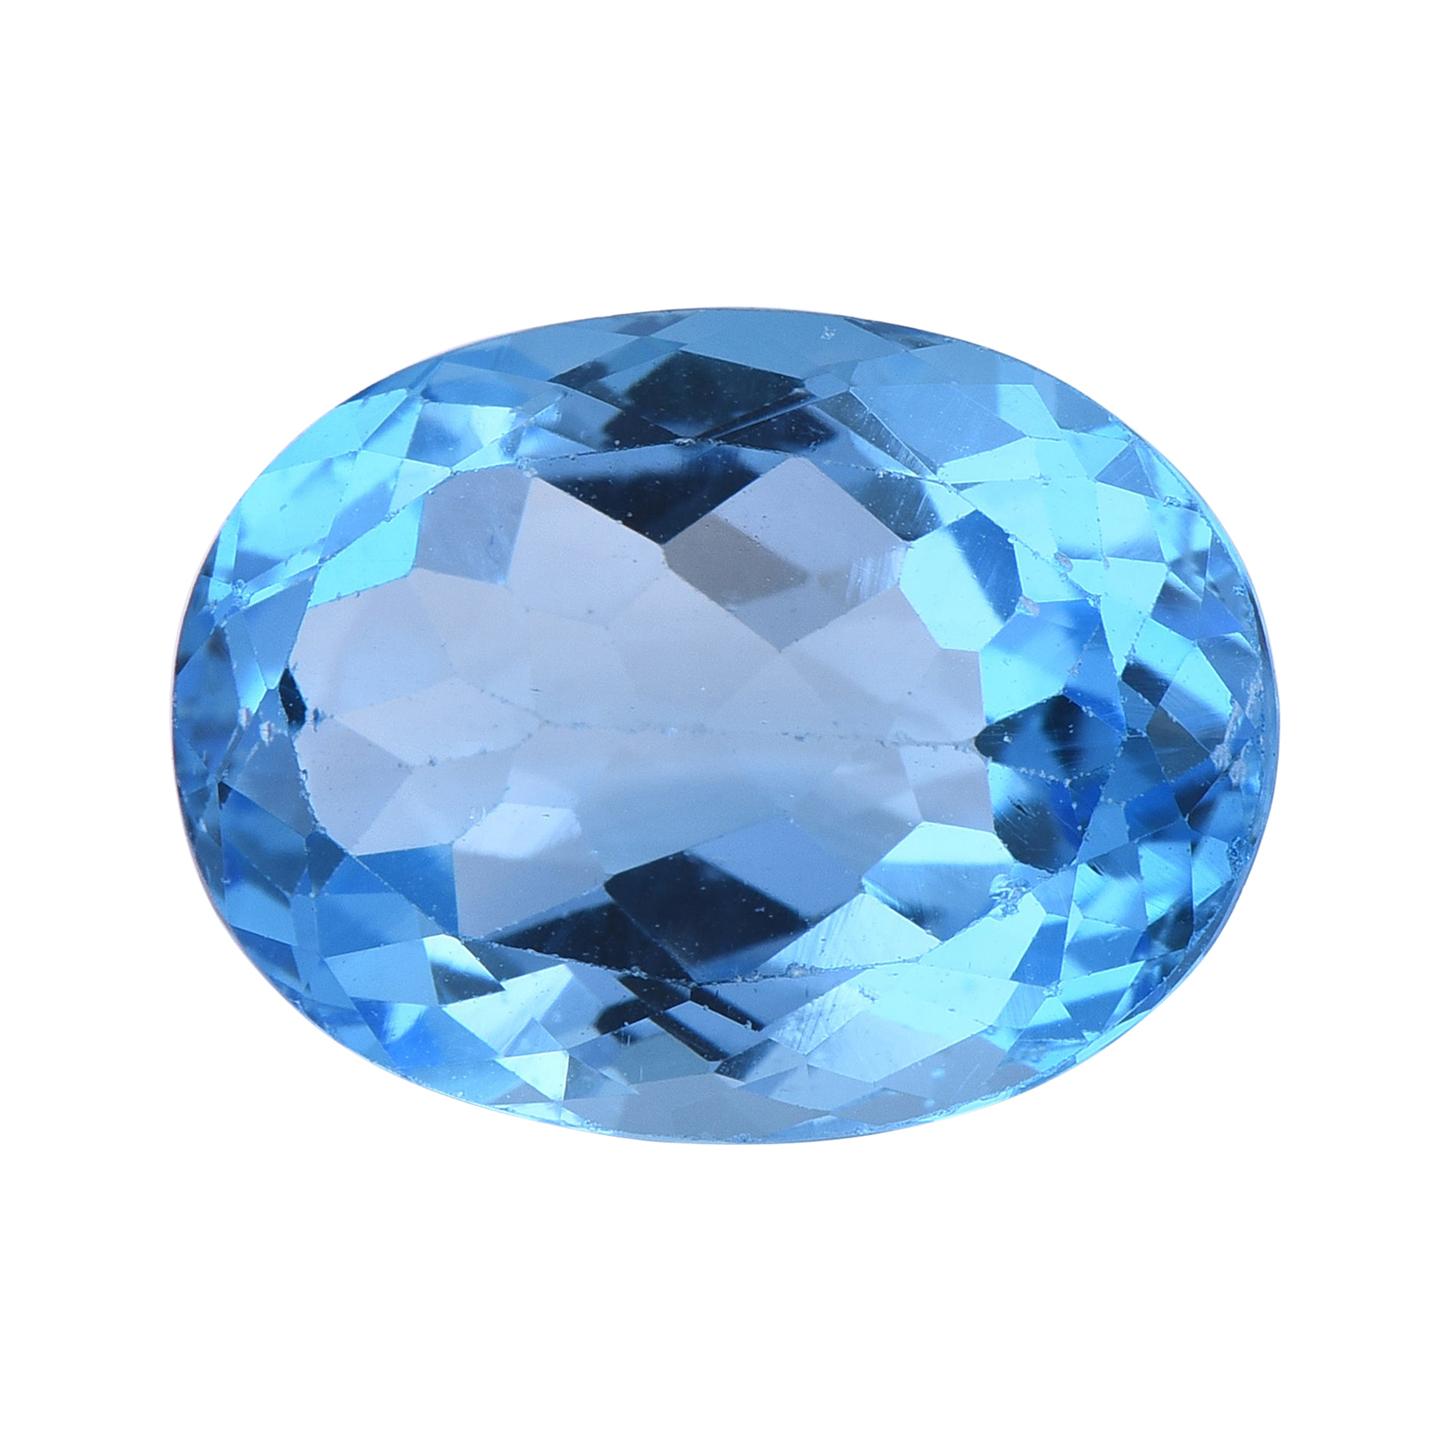 TJD Loose Natural Swiss Blue Topaz 11.59ct Oval Shape Gemstone for Any Jewellery